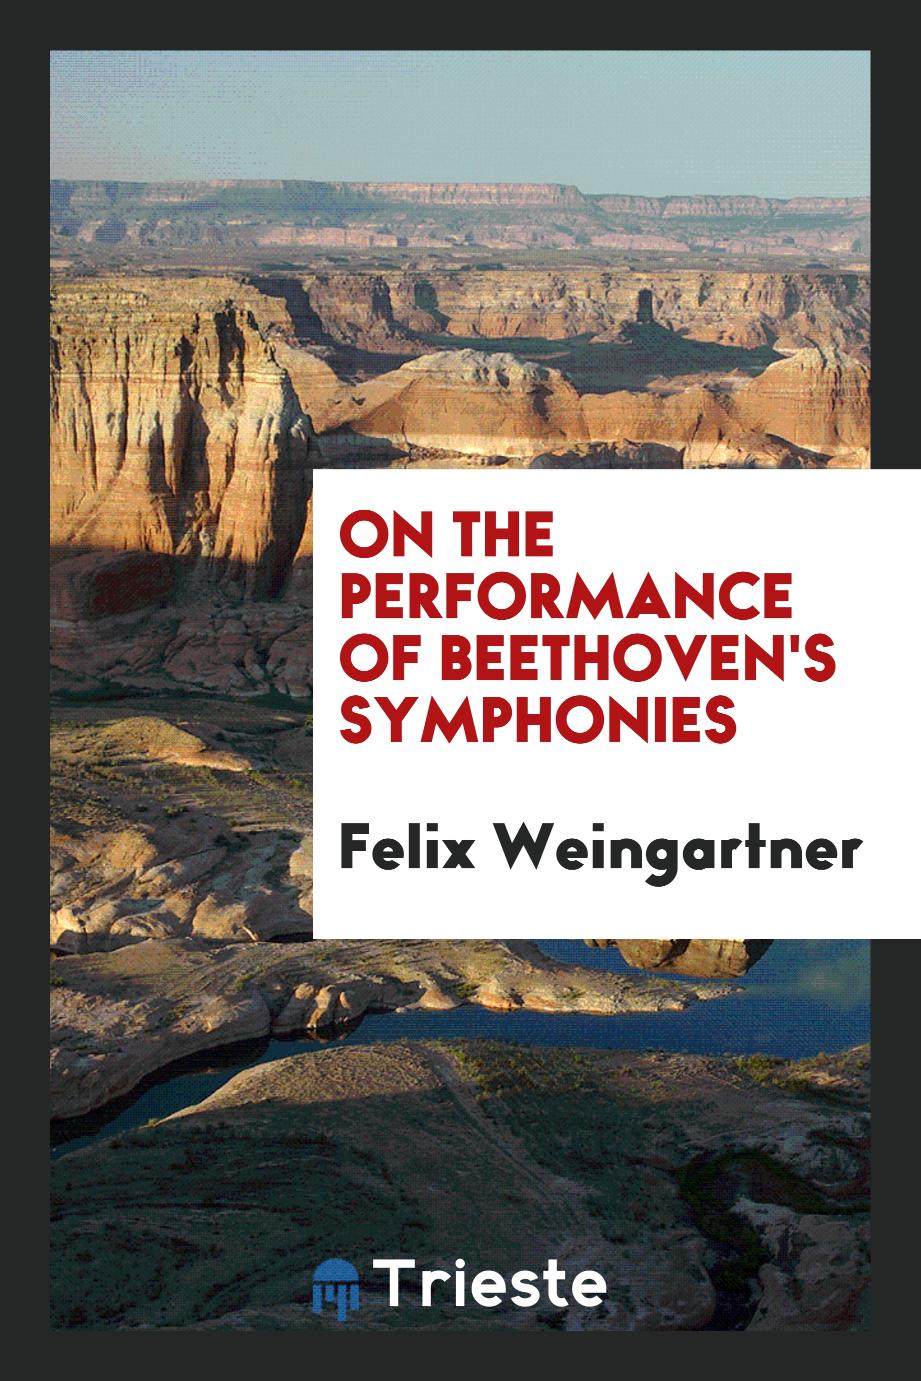 On the performance of Beethoven's symphonies